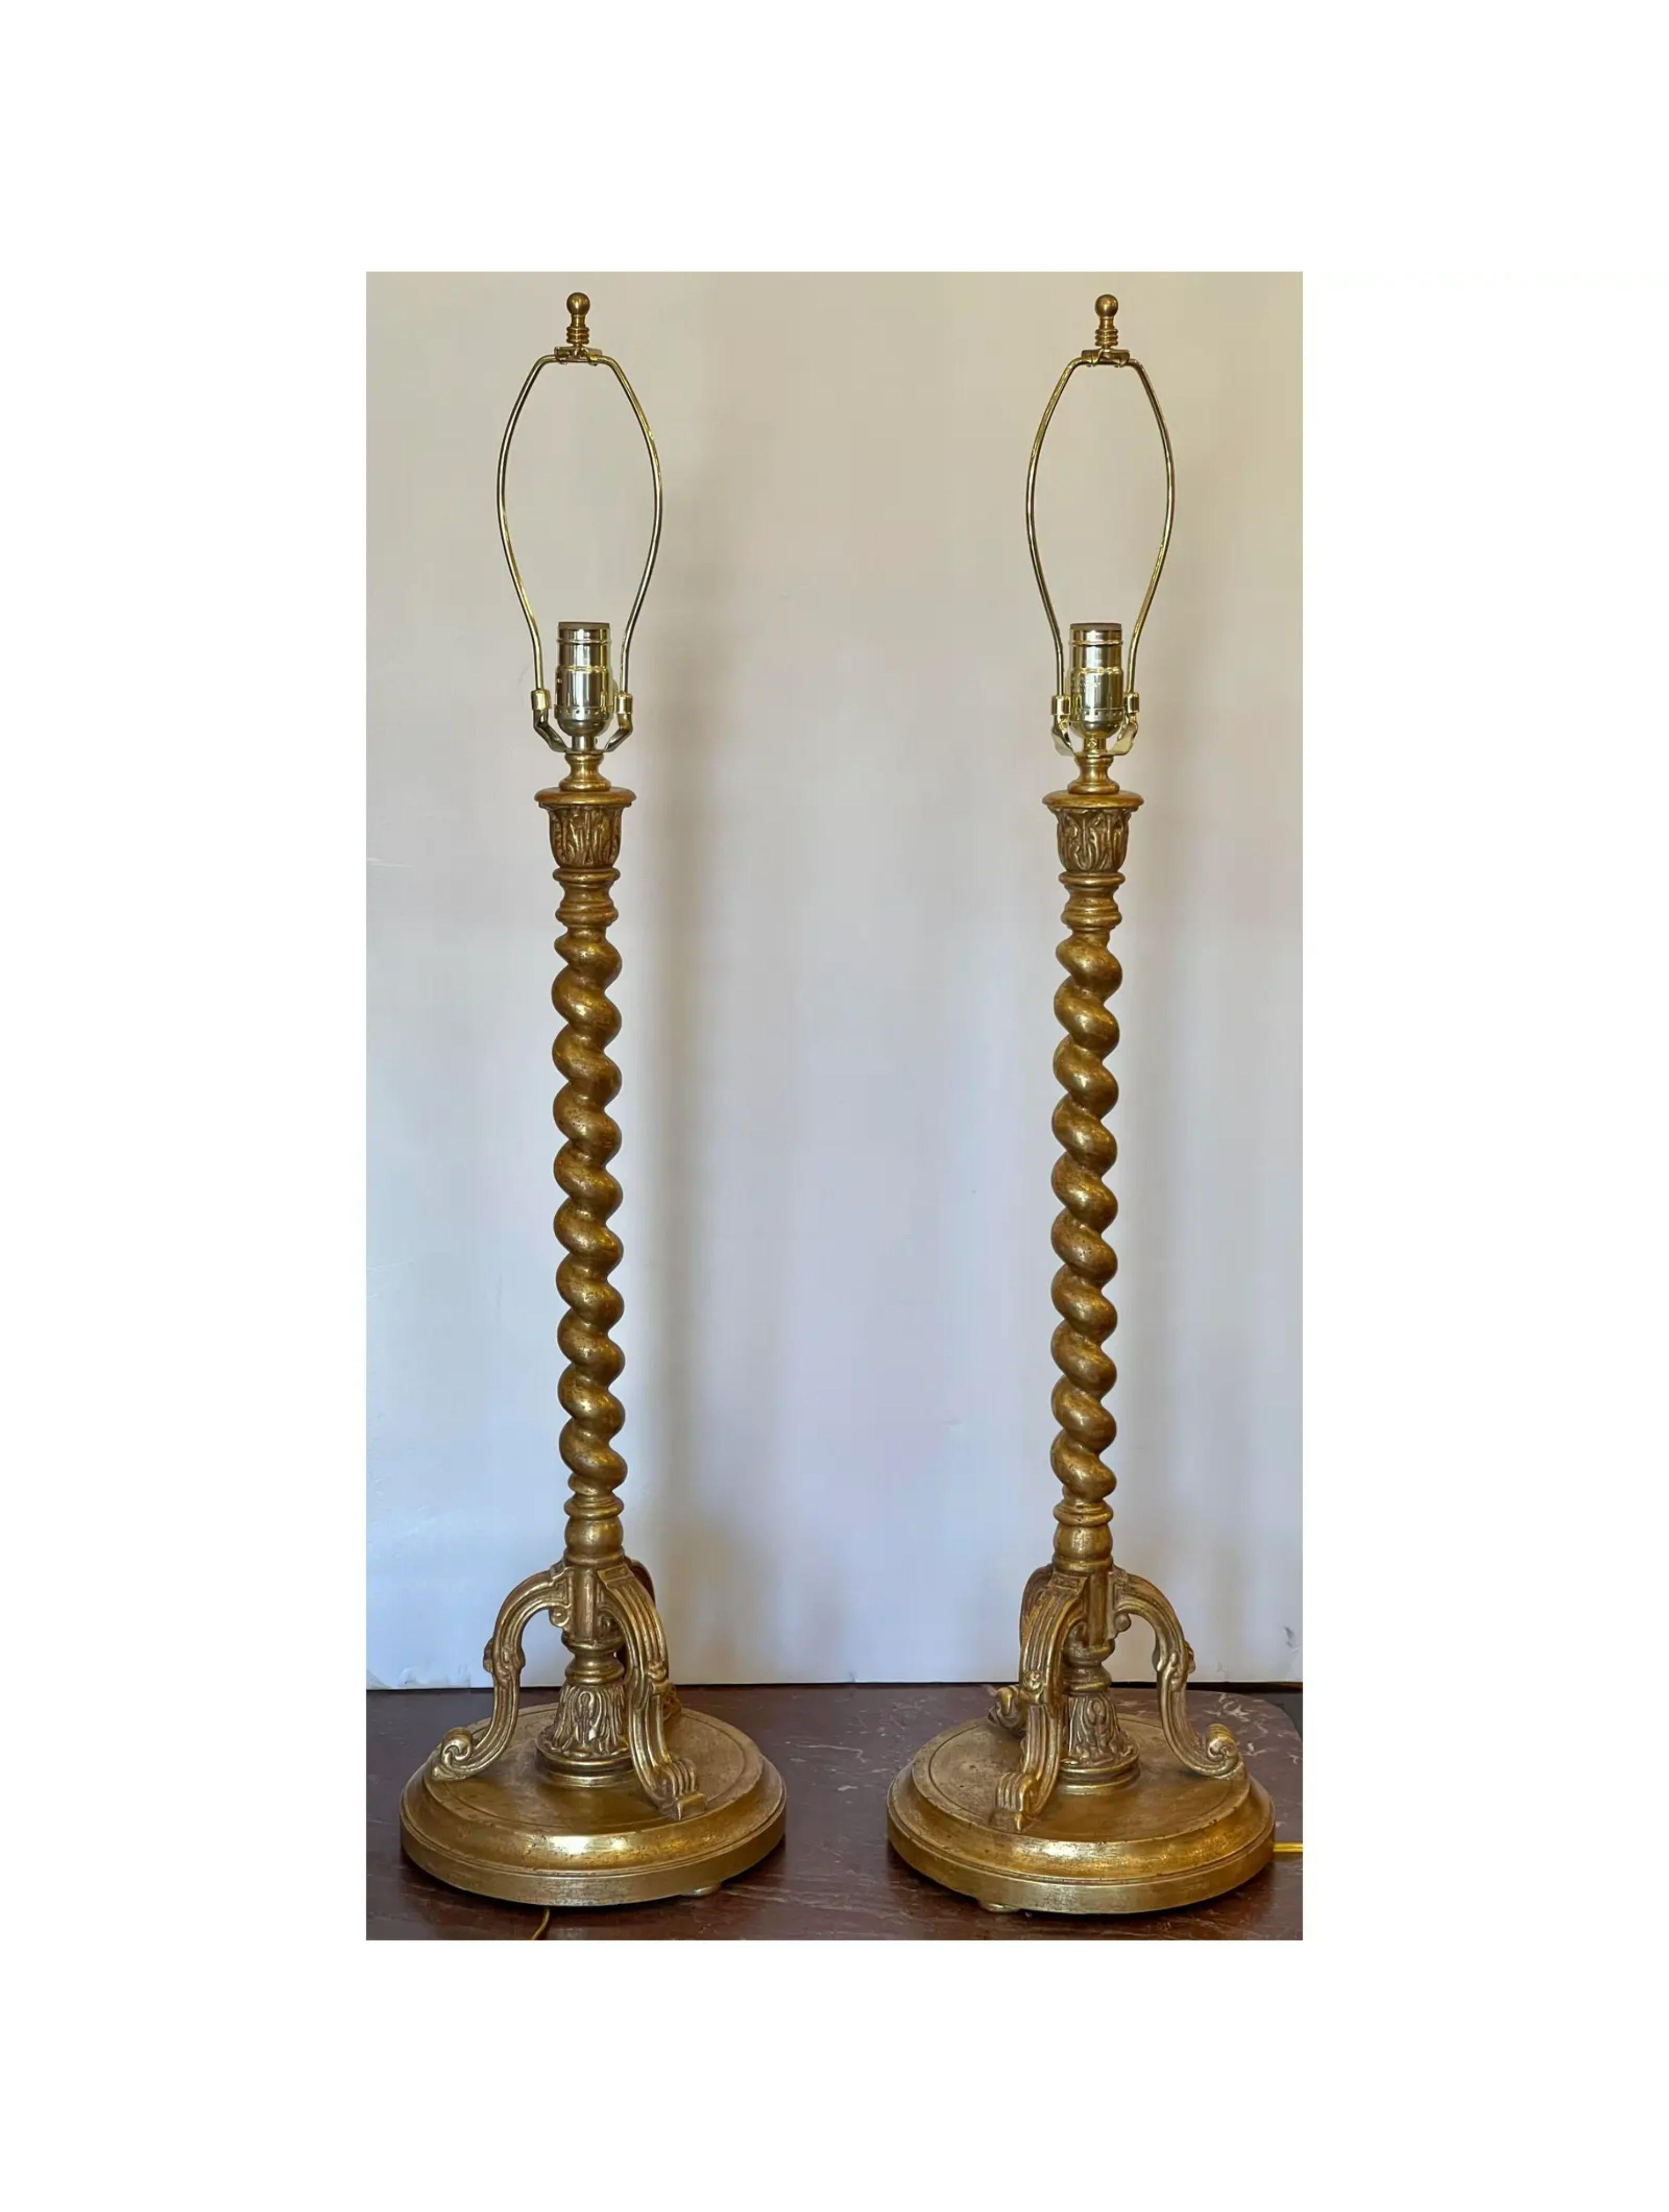 Contemporary Pair of 19th C Style Giltwood Venetian Rope Table Lamp by Randy Esada Designs For Sale